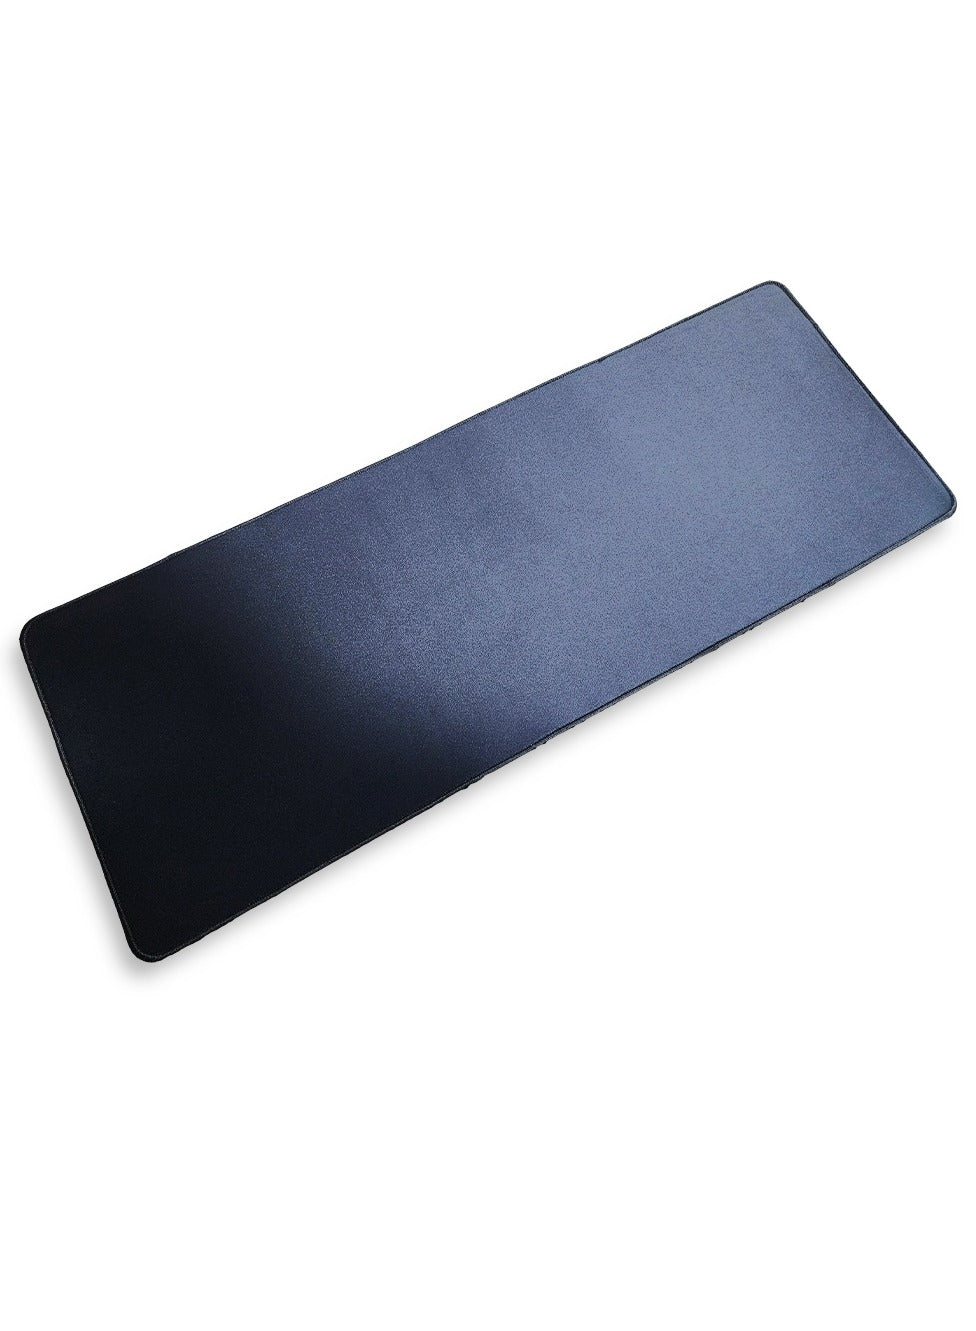 Gaming Mouse Pad - Size 80X30 CM - Stitched Edges Anti-slip rubber base - Optimized for all mouse sensitivities and sensors - Model Mix Pads KK6